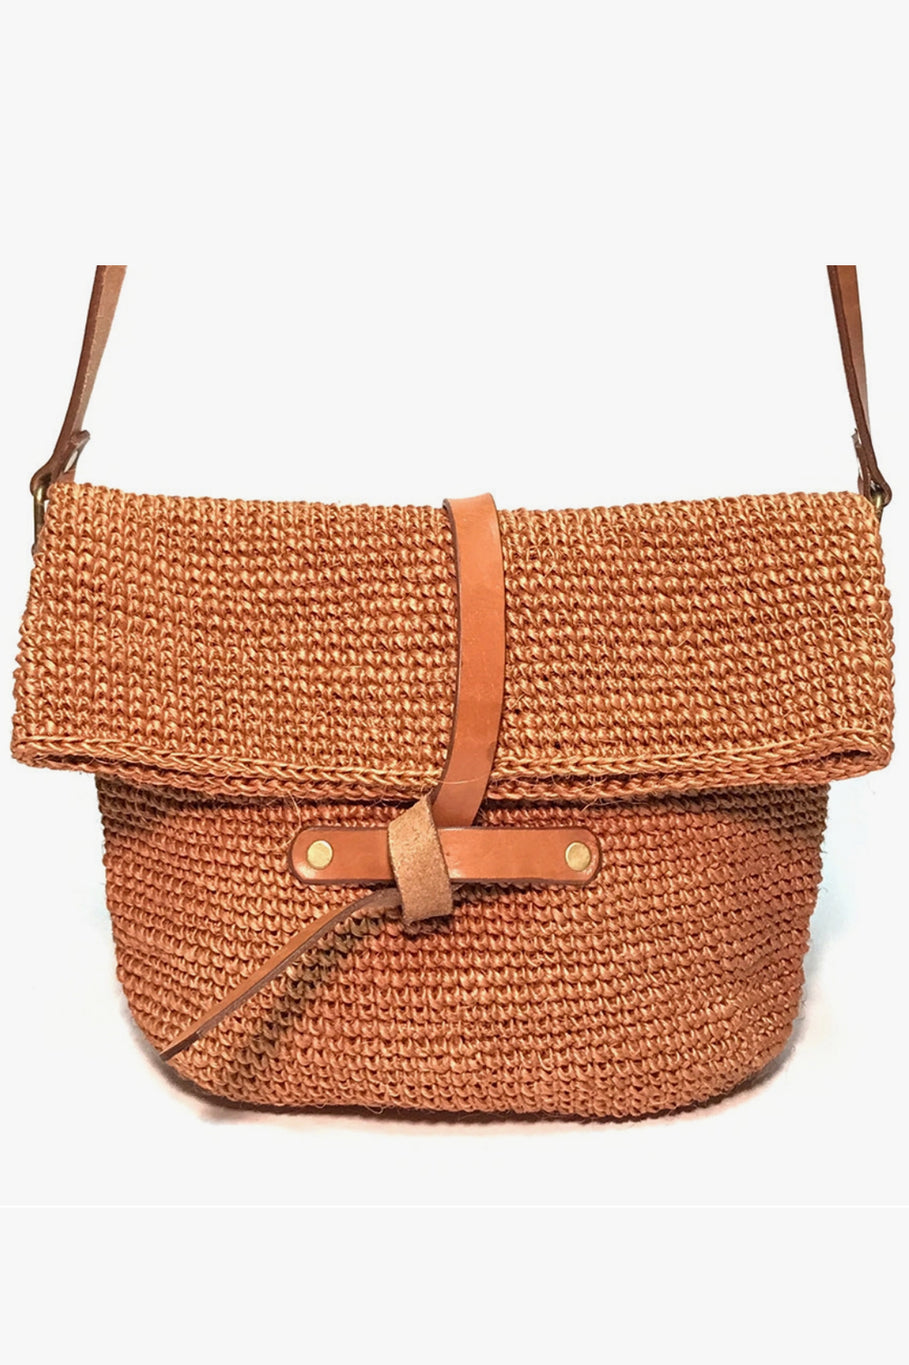 Crocheted Crossbody Bag with Leather Tie